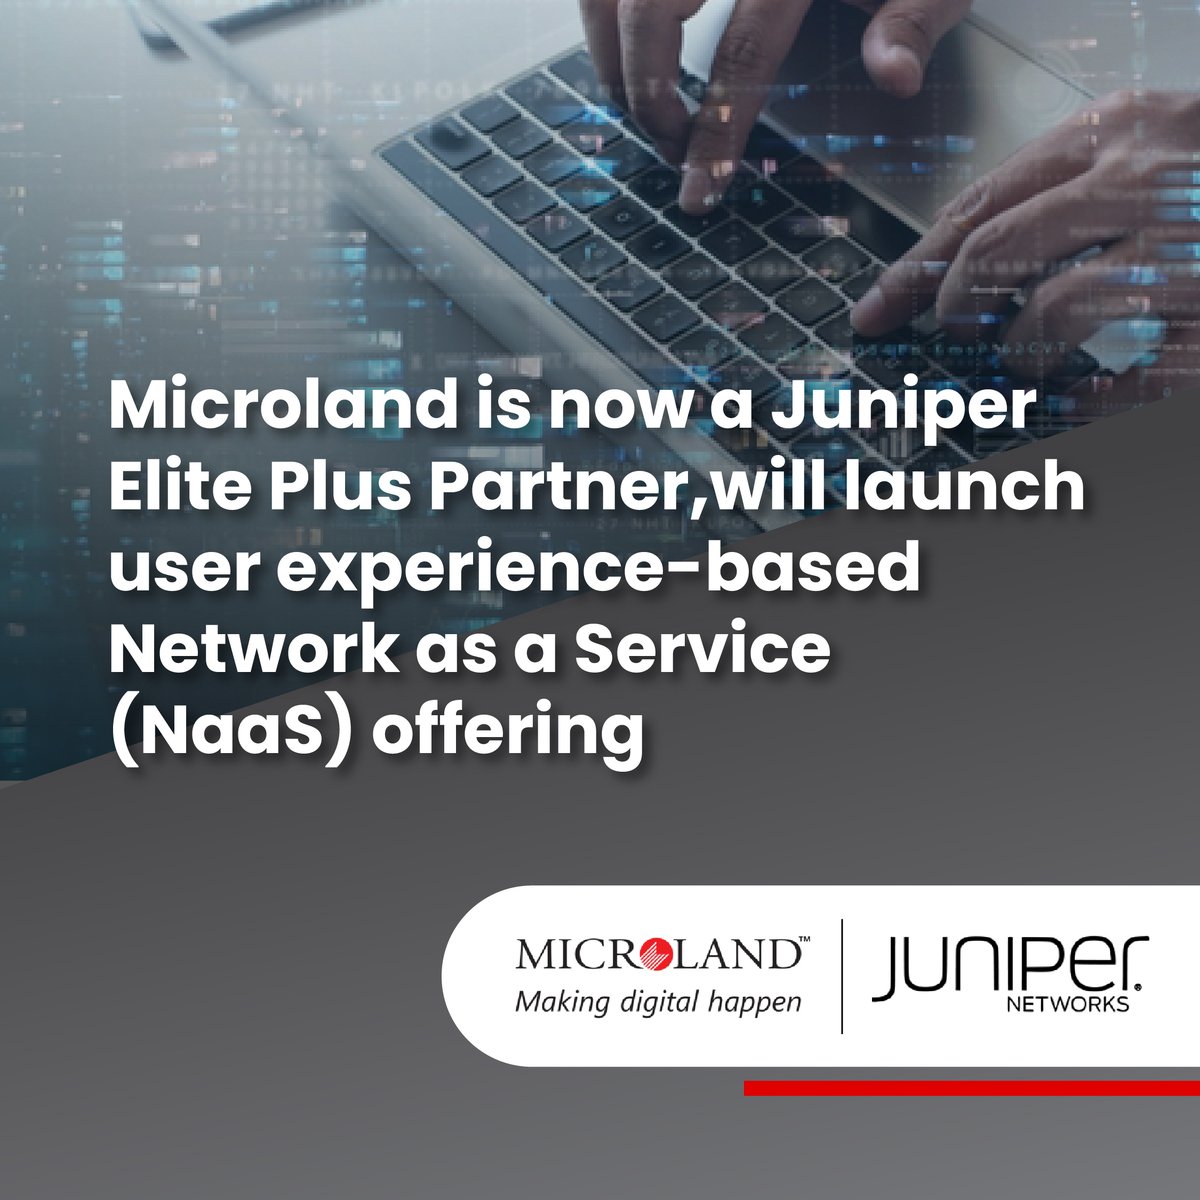 Microland announces its Global Elite Plus status with Juniper Networks to launch a user experience-based NaaS offering. It’s a significant step towards enabling the resilience and efficiency of network infrastructures. Read more. t.ly/Wlocc